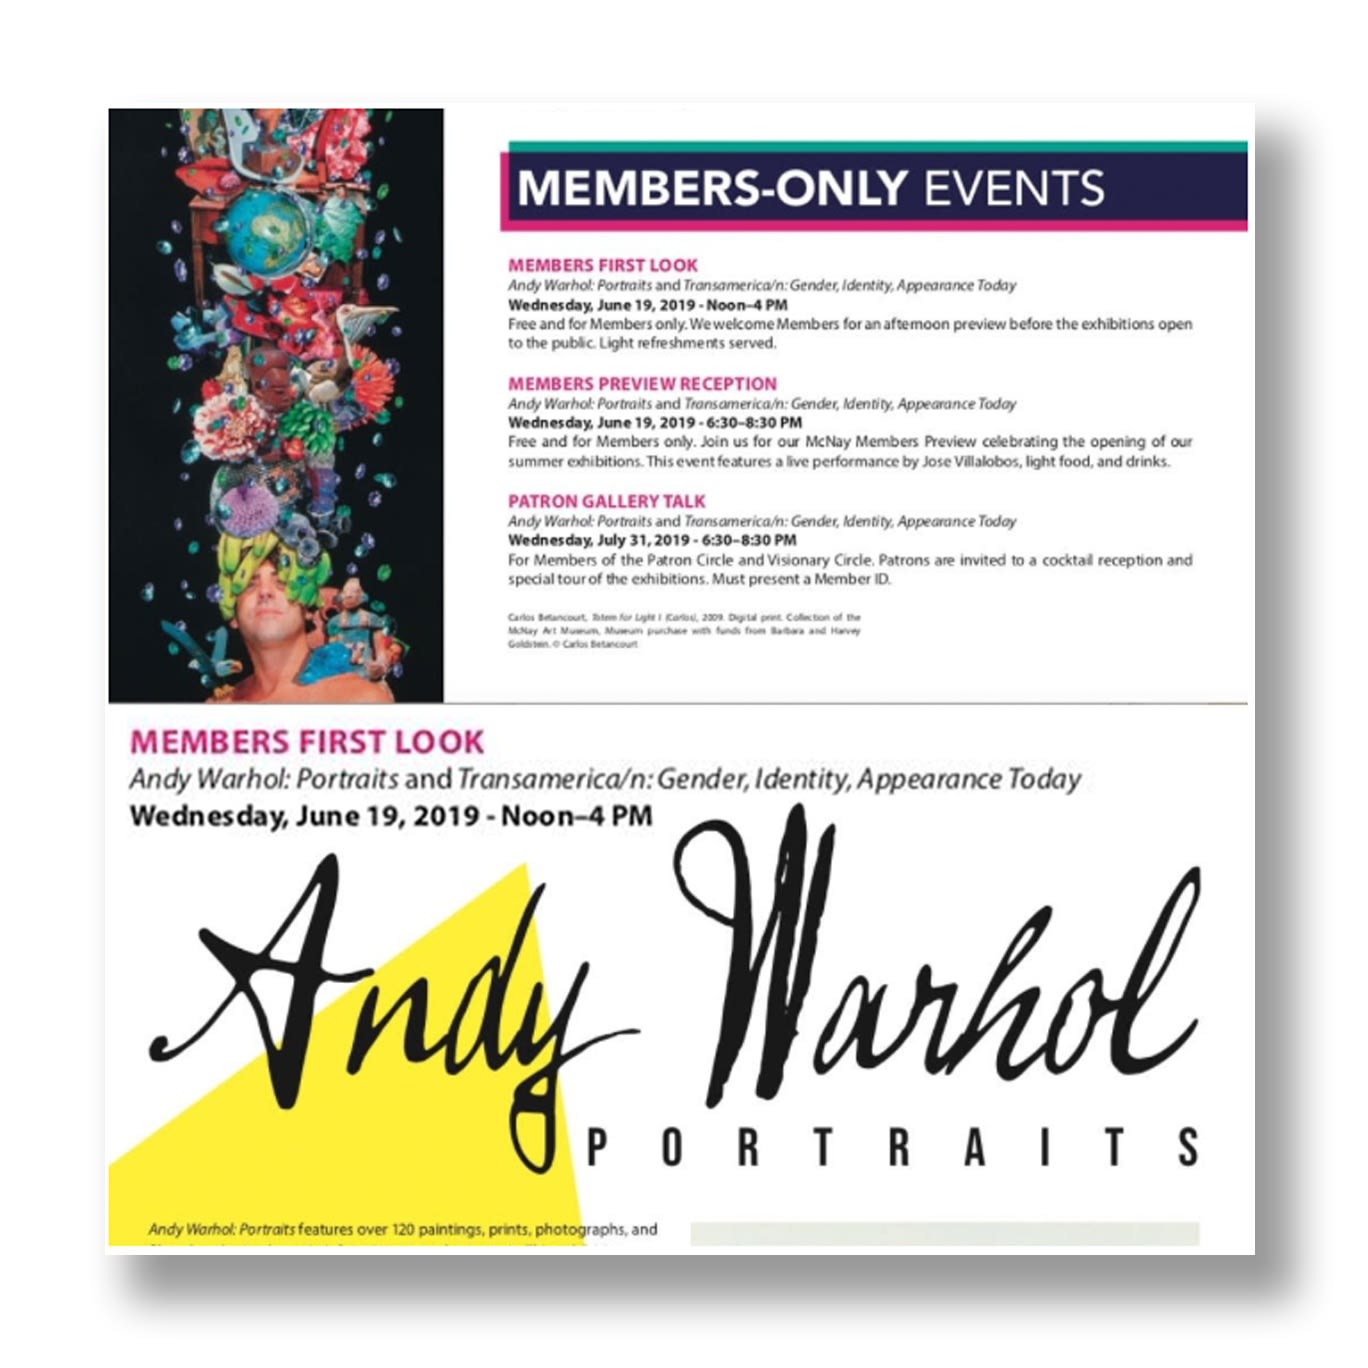 Andy Warhol: Portraits and Transamerica/n: Gender, Identity, Appearance Today